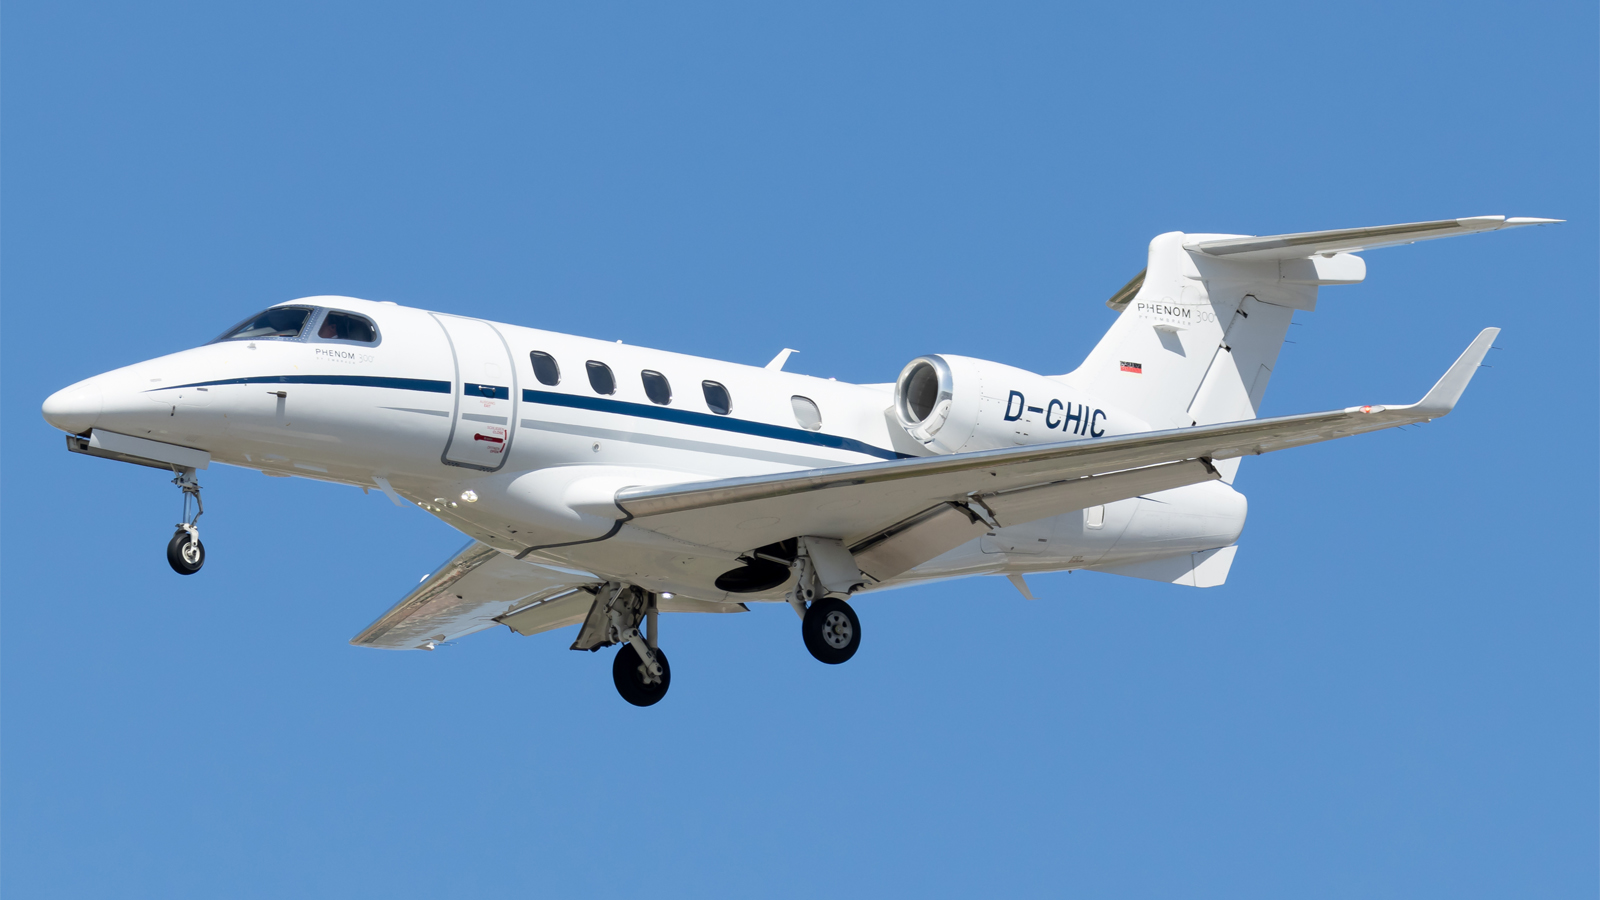 2012 Embraer Phenom 300 Private Jet For Sale From BAS On AvPay aircraft exterior in flight